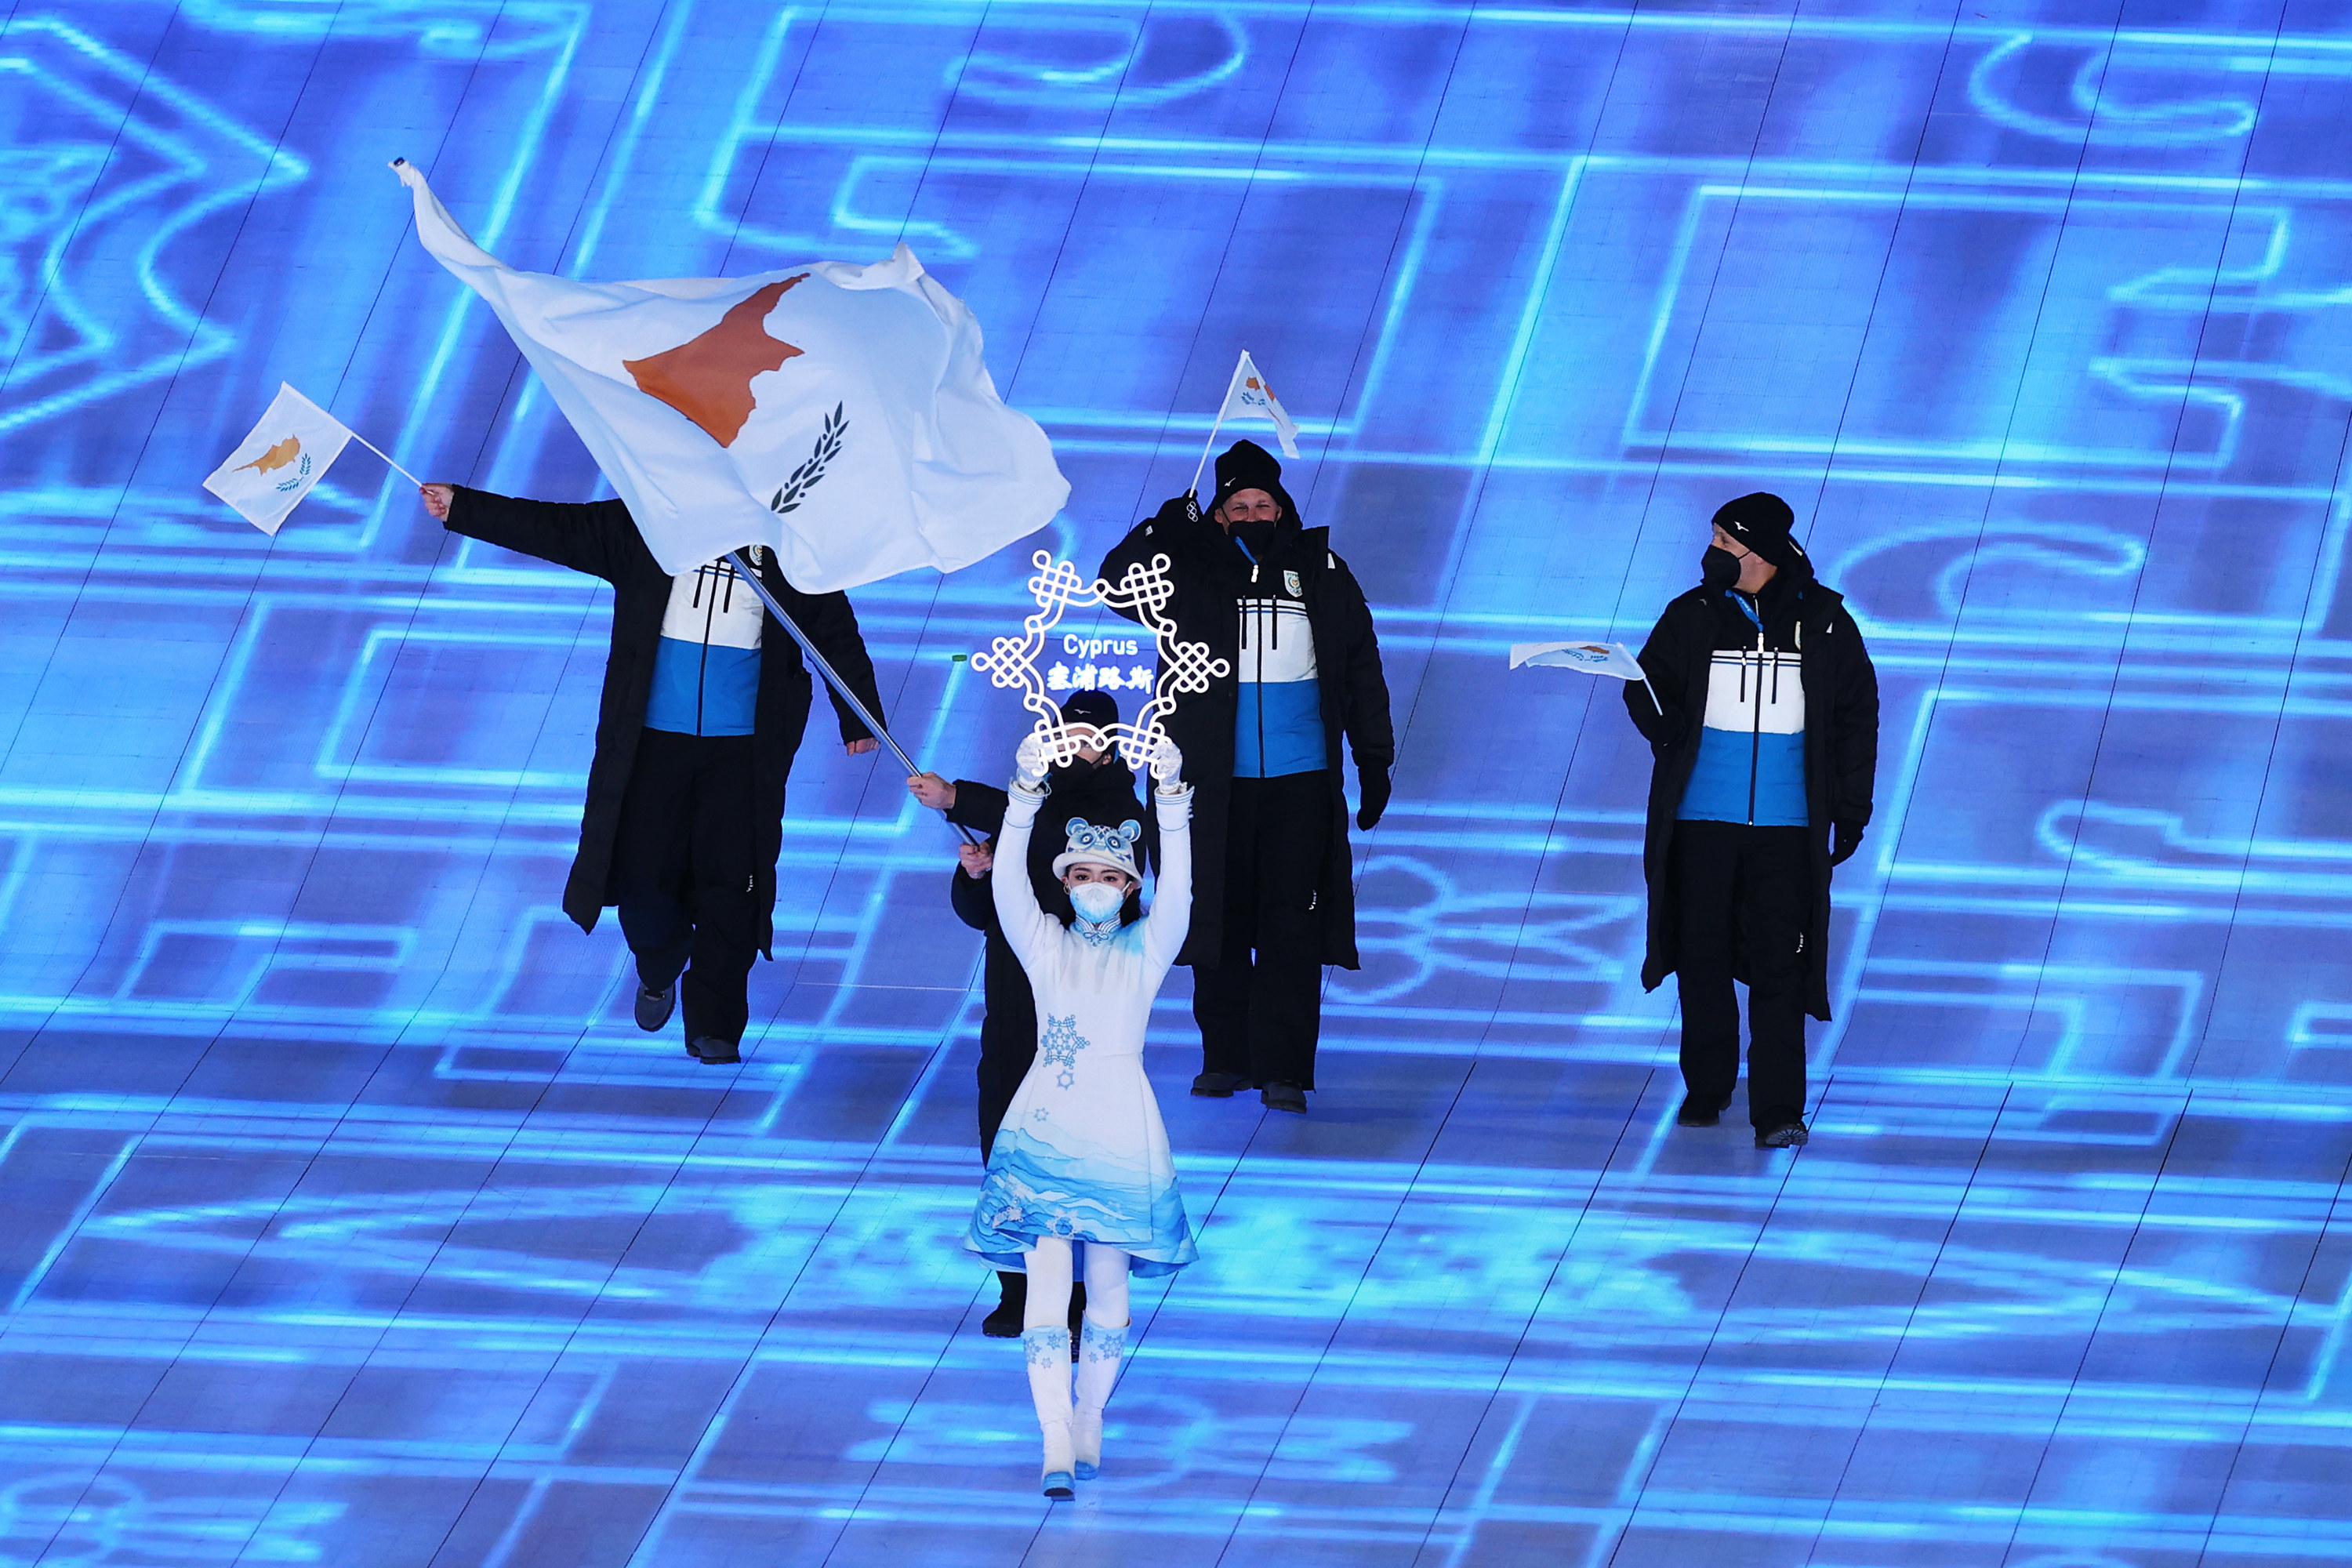 The team delegation from Cyprus entering the stadium during the Beijing Opening Ceremony